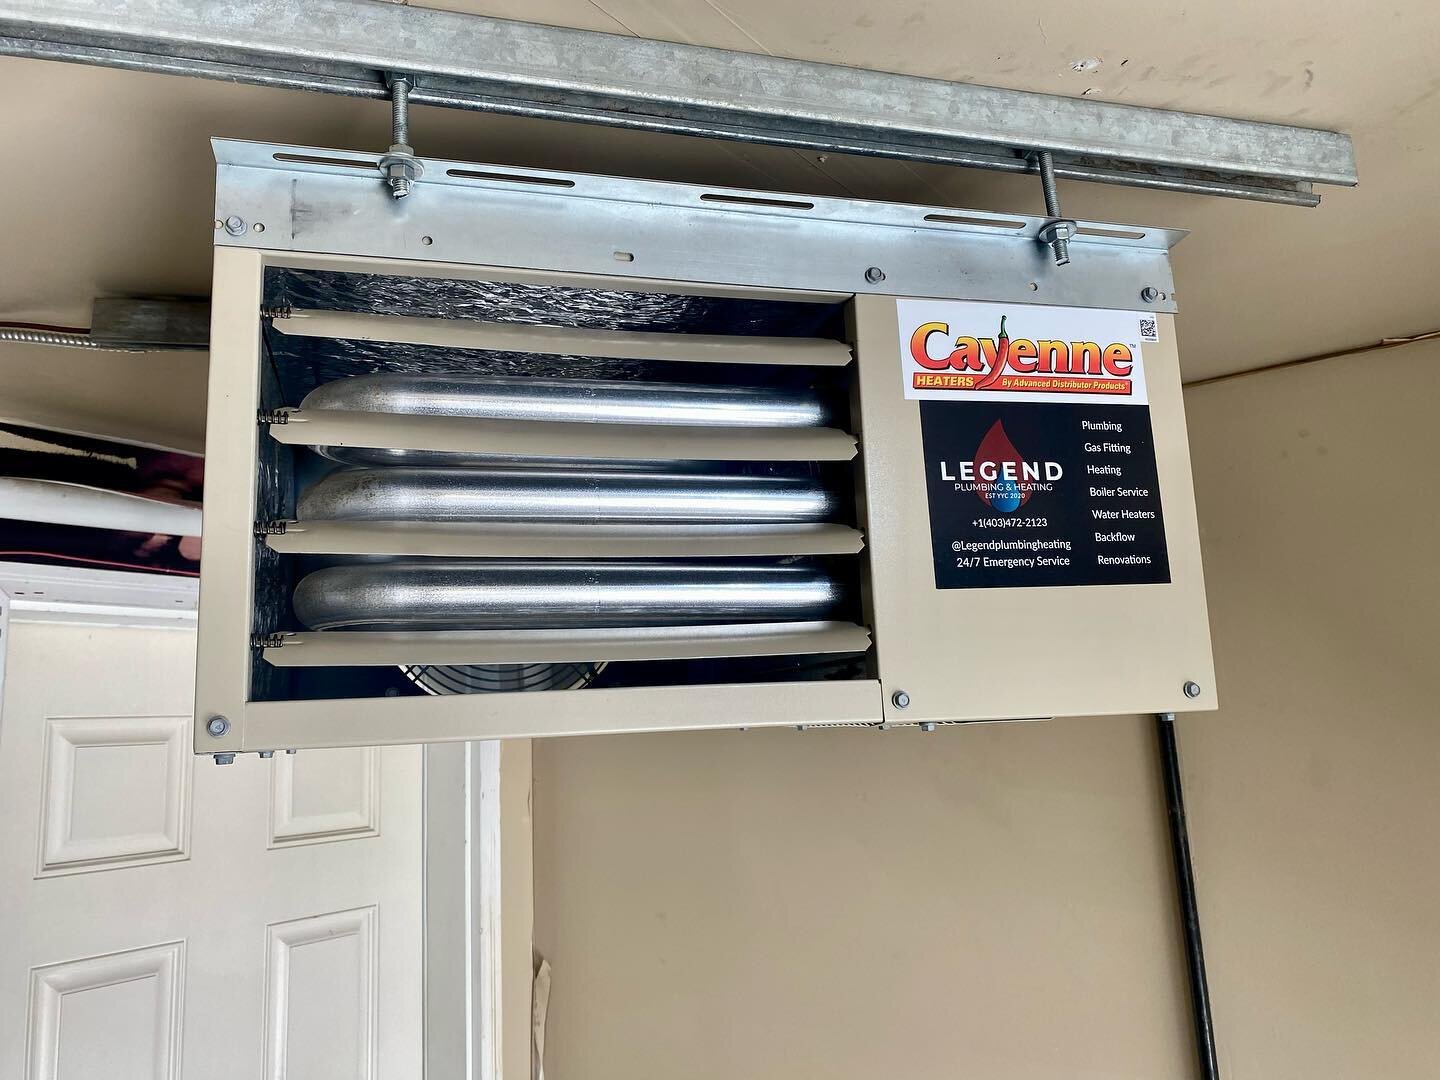 Keep your garage (and your car) toasty warm this winter! 🔥
&bull;
Garage heaters are energy efficient, take up almost no space and run quietly.
&bull;
Call us for a quote and get yours installed before you have to fight over who scrapes the frosty c